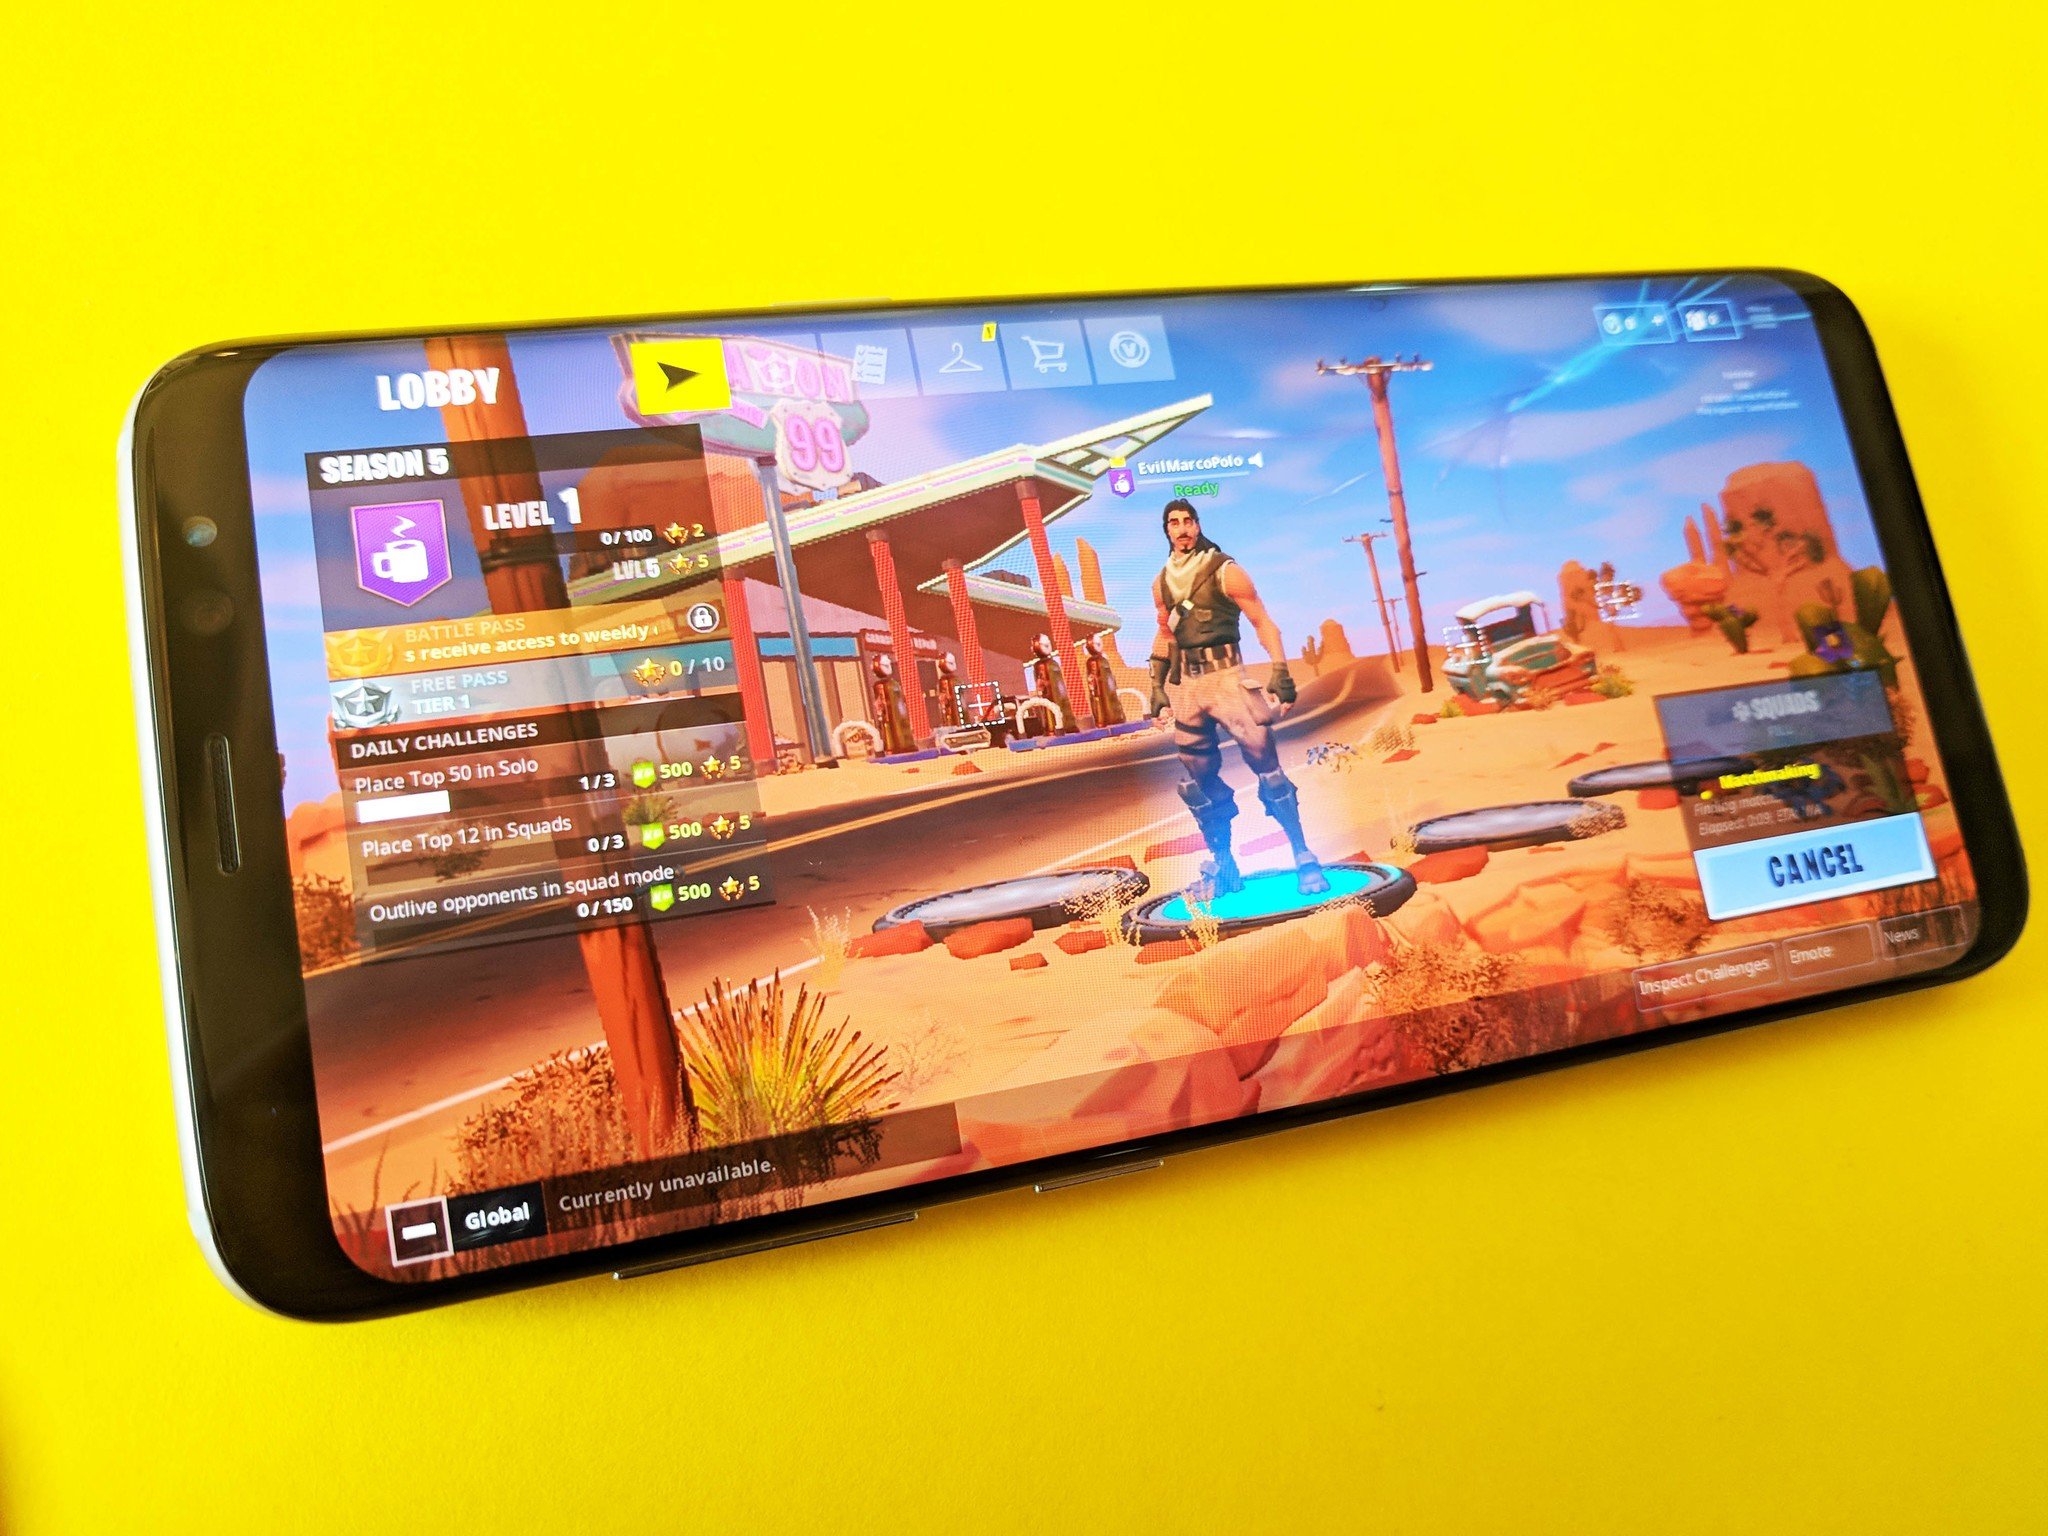 fortnite now available on android samsung exclusive until august 12 - fortnite android app beta